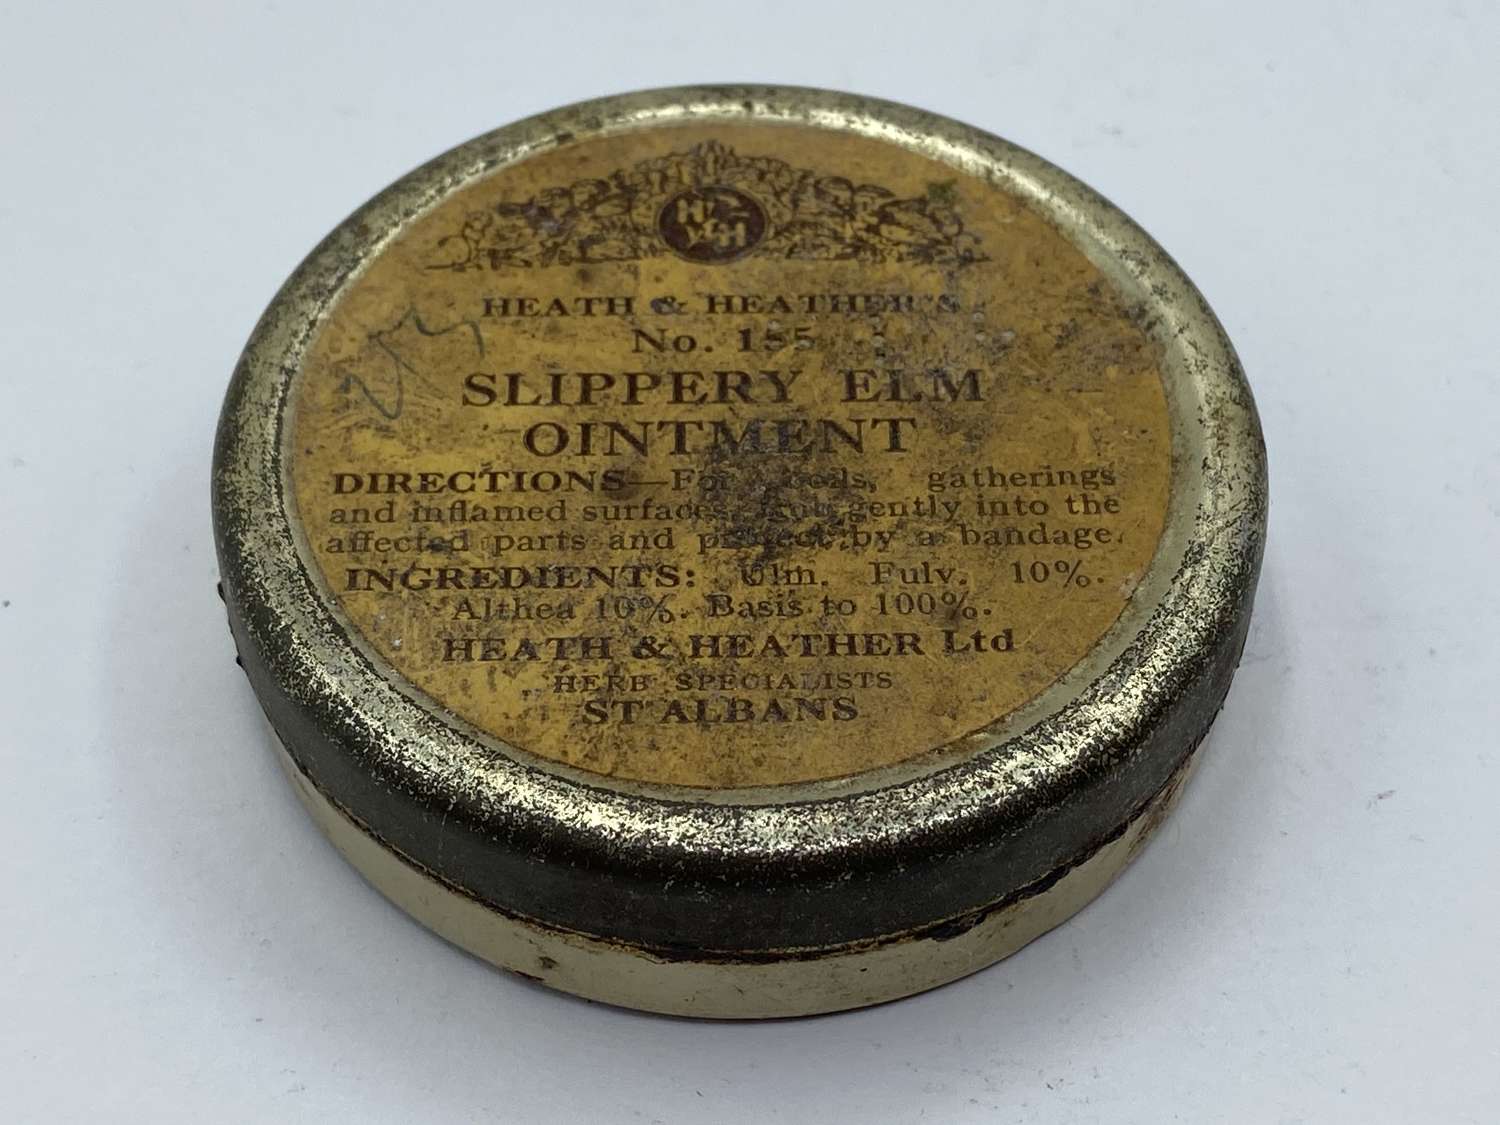 WW1 Era British Medical Home Front Slippery Elm Ointment